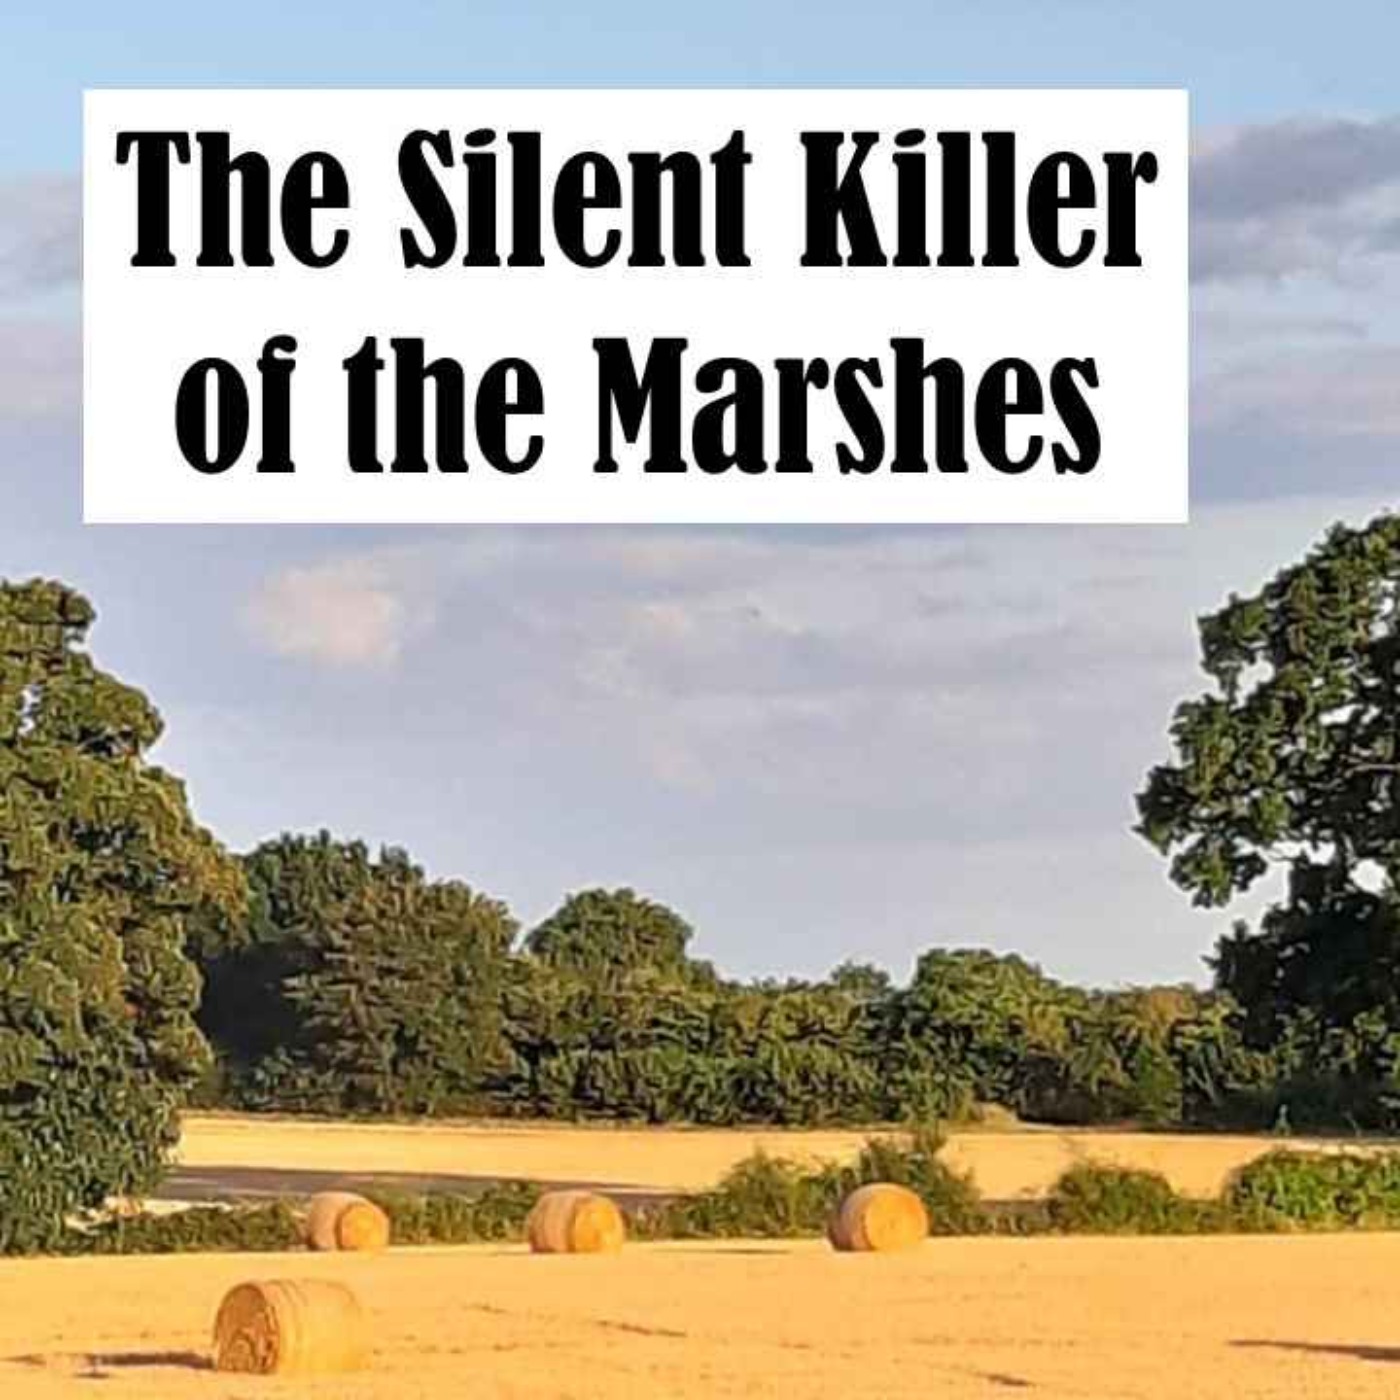 The Quiet Men of England: The Silent Killer of the Marshes